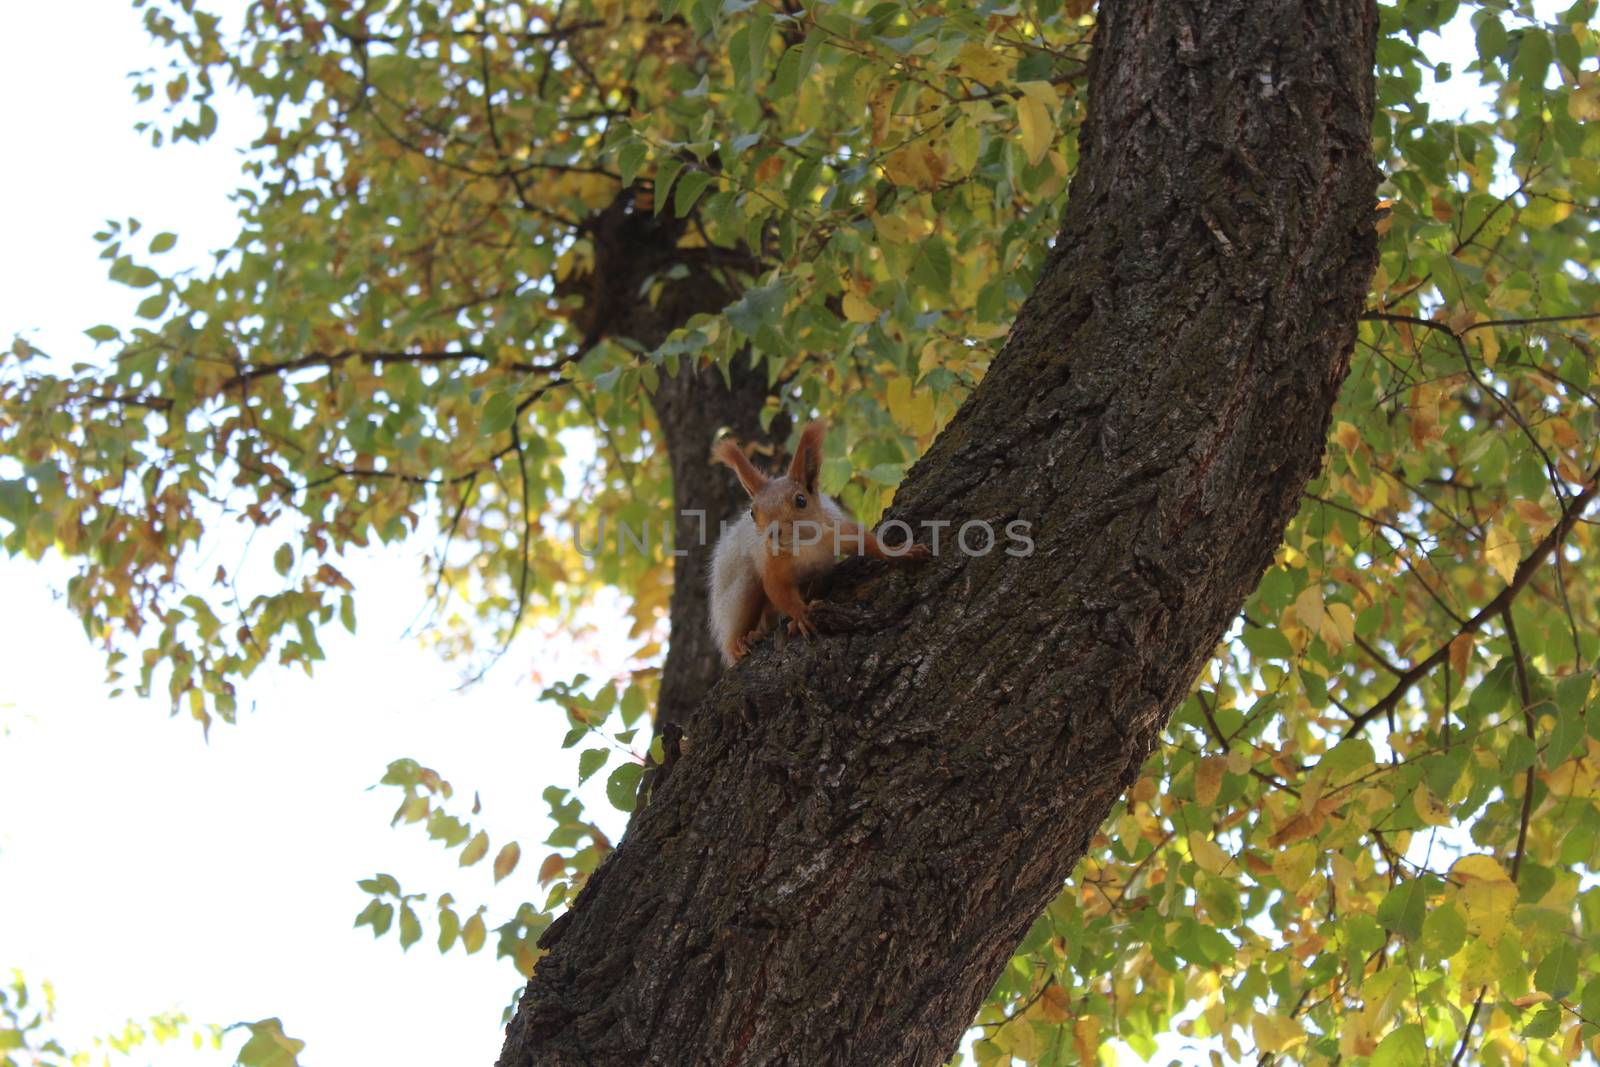 Red squirrel sitting on the tree.